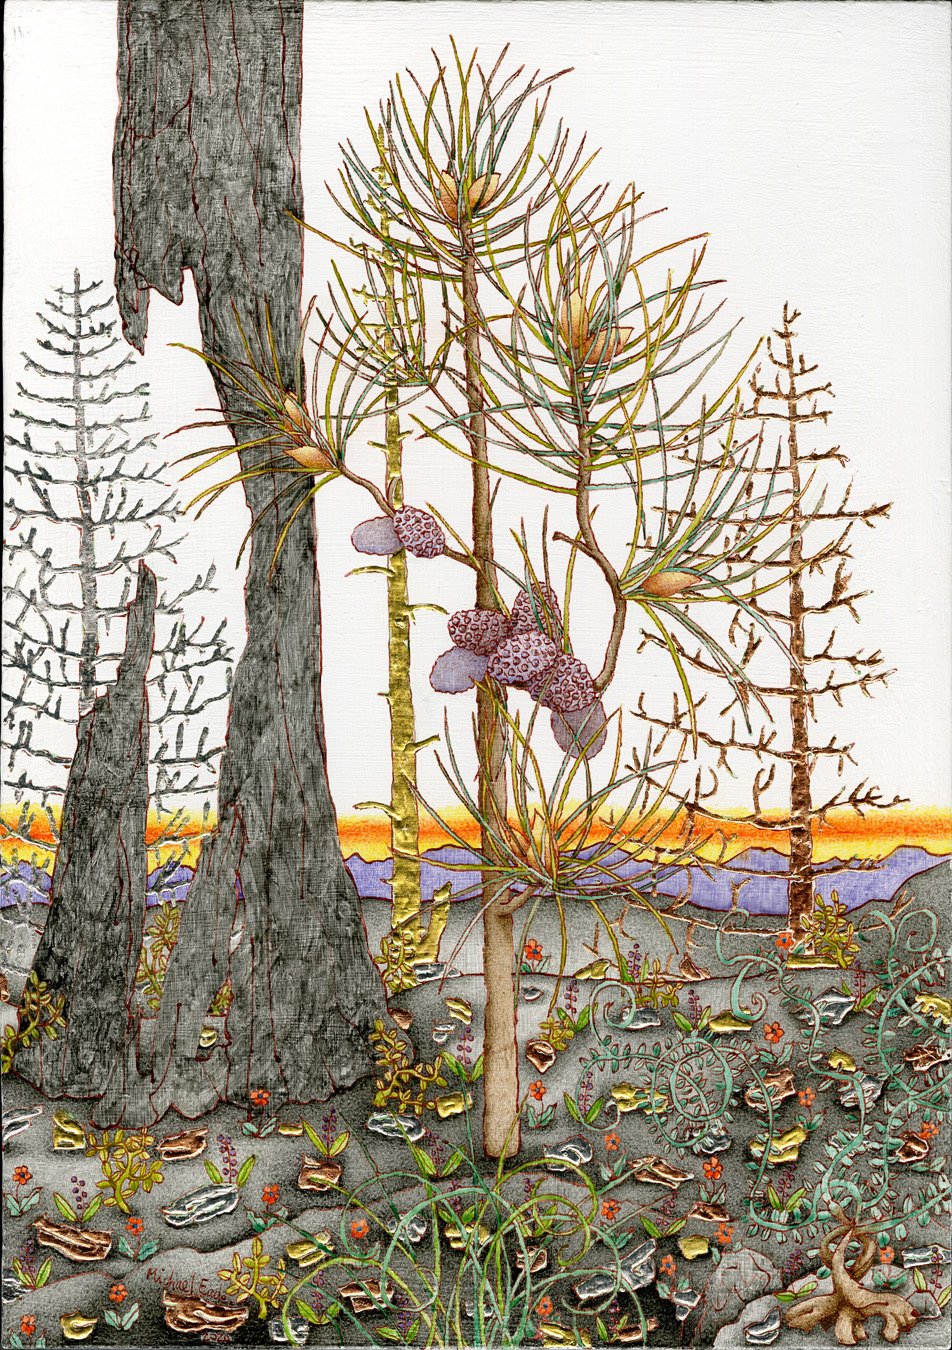  Michael Eade,  Early Sunrise, Pine Tree Sapling (Small), No. 3,  2020. Egg tempera, raised 22k gold leaf, raised copper and aluminum leaf on wood panel. 17 x 12 inches @Michael Eade, courtesy of Fou Gallery 